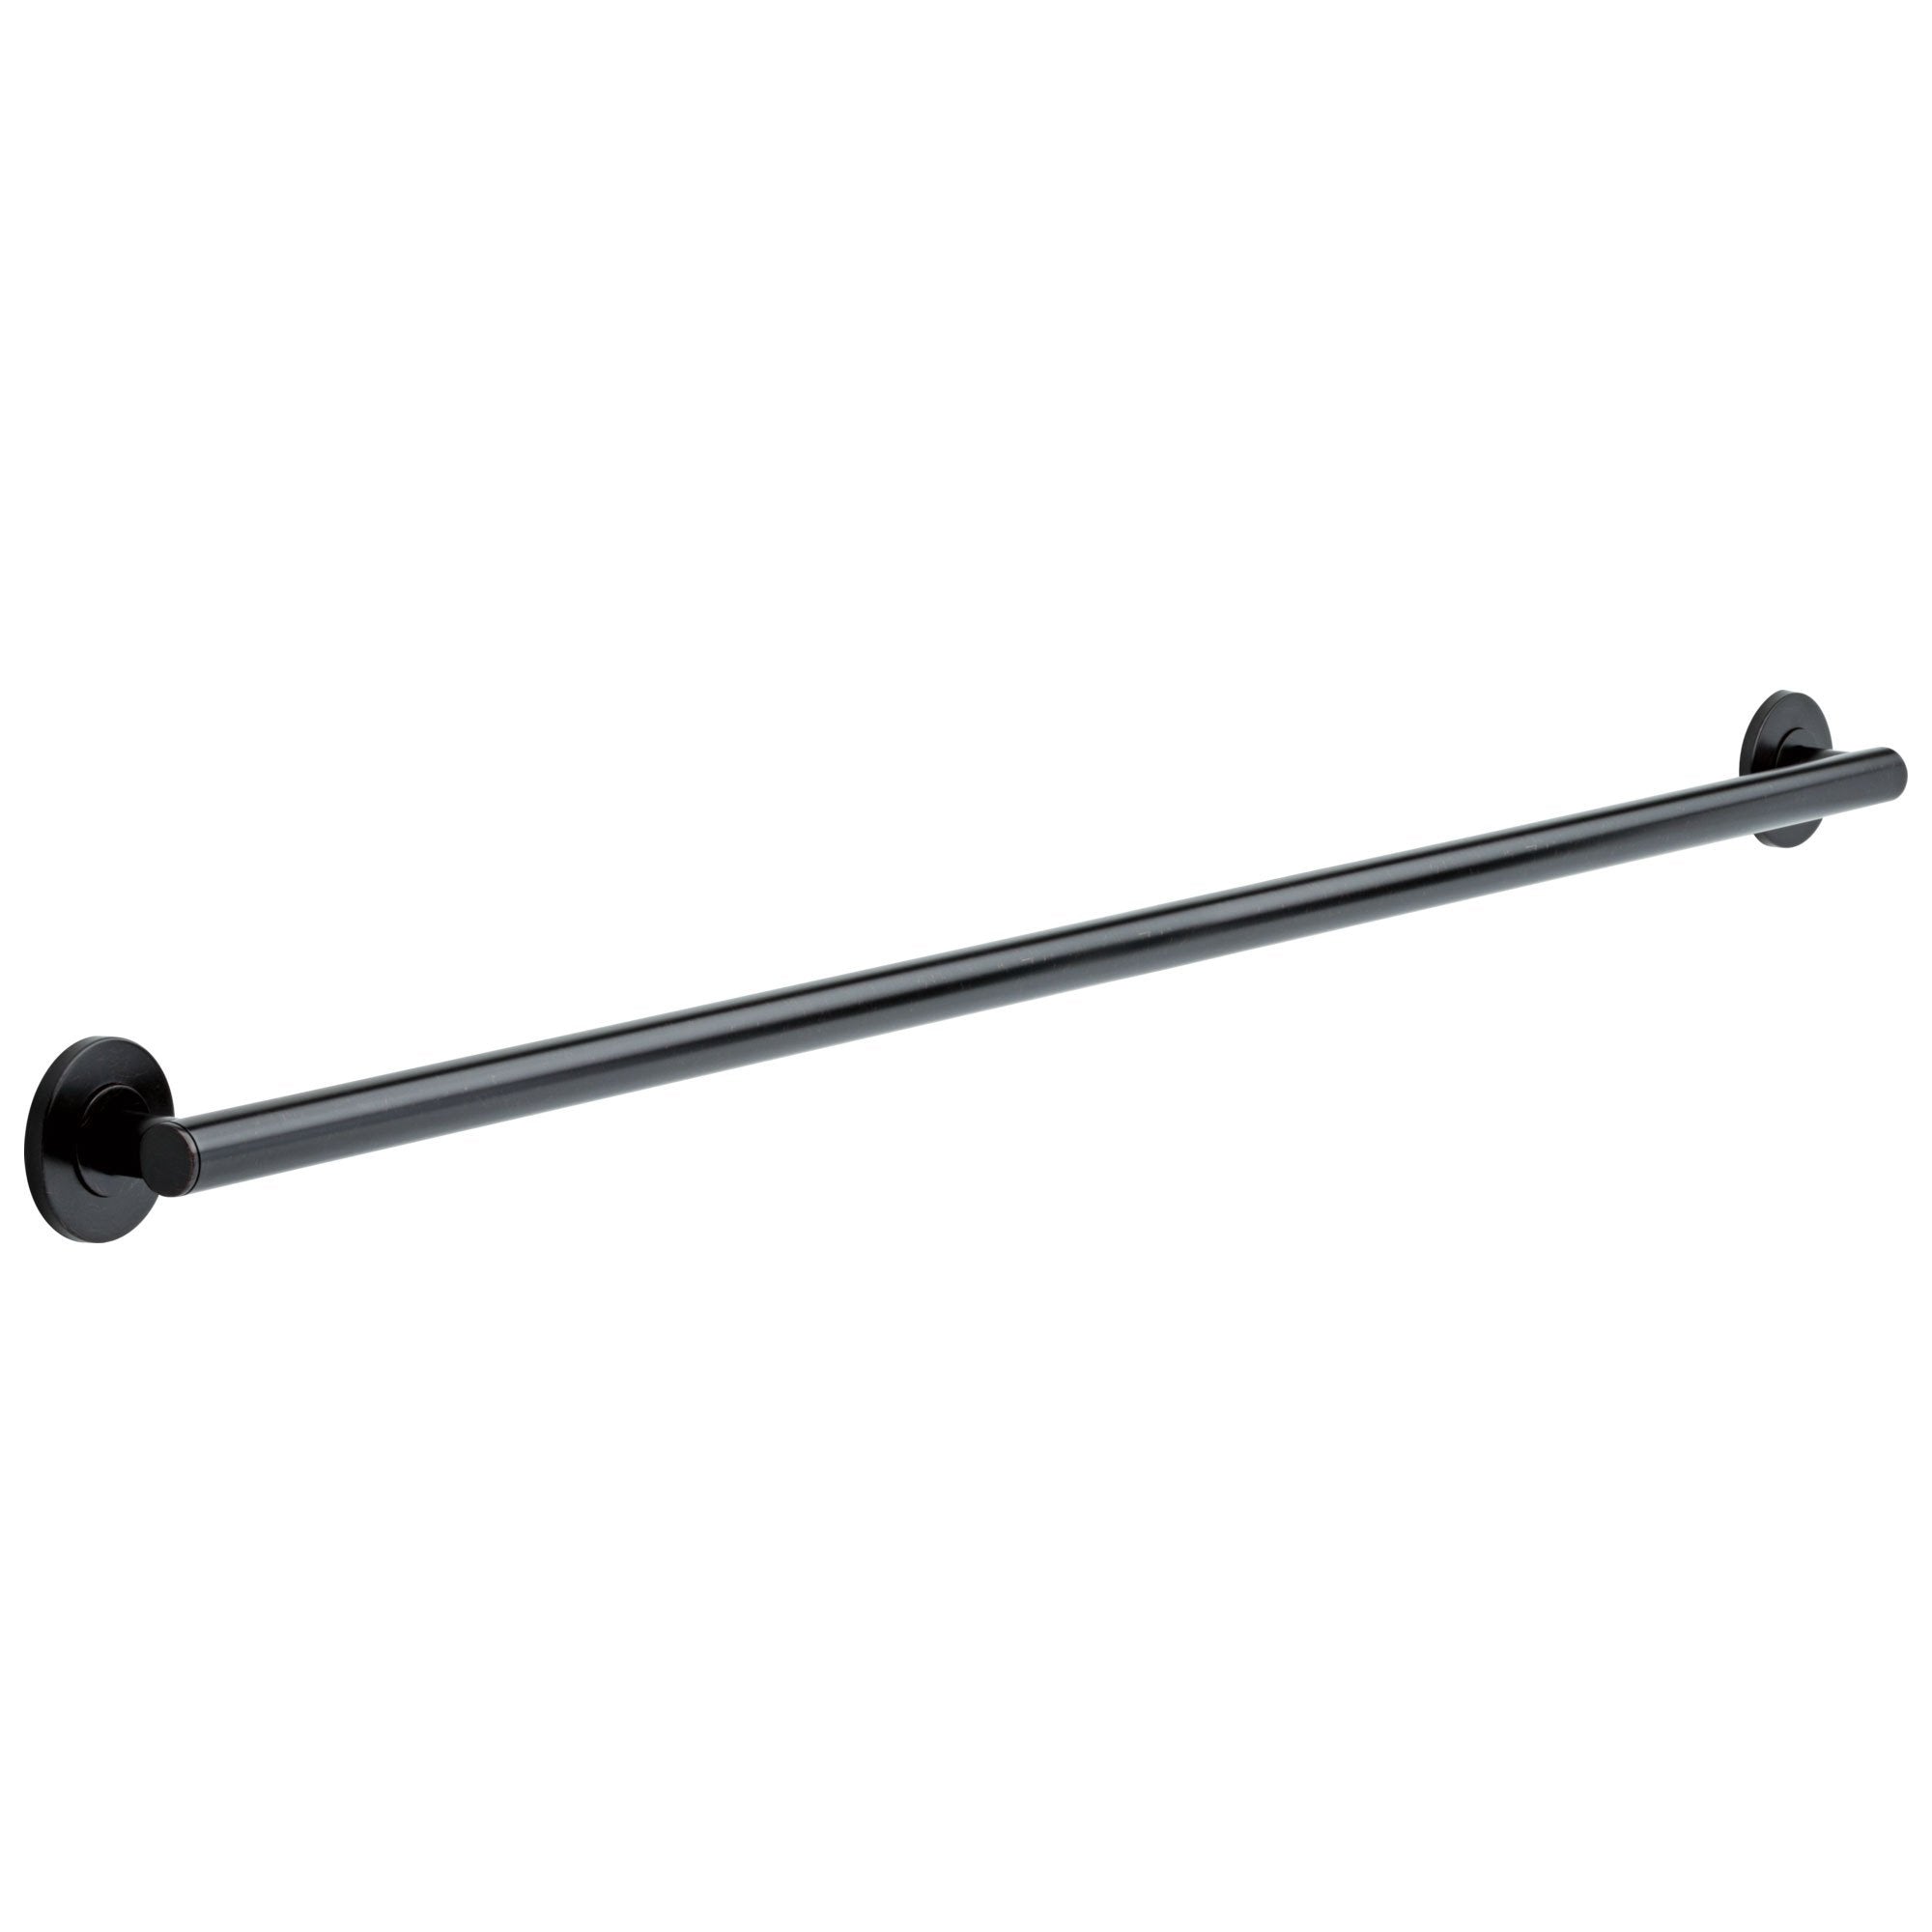 Delta Bath Safety Collection Venetian Bronze Contemporary Concealed Wall Mount ADA Approved 42" Long Decorative Bathroom Grab Bar / Towel Bar D41842RB